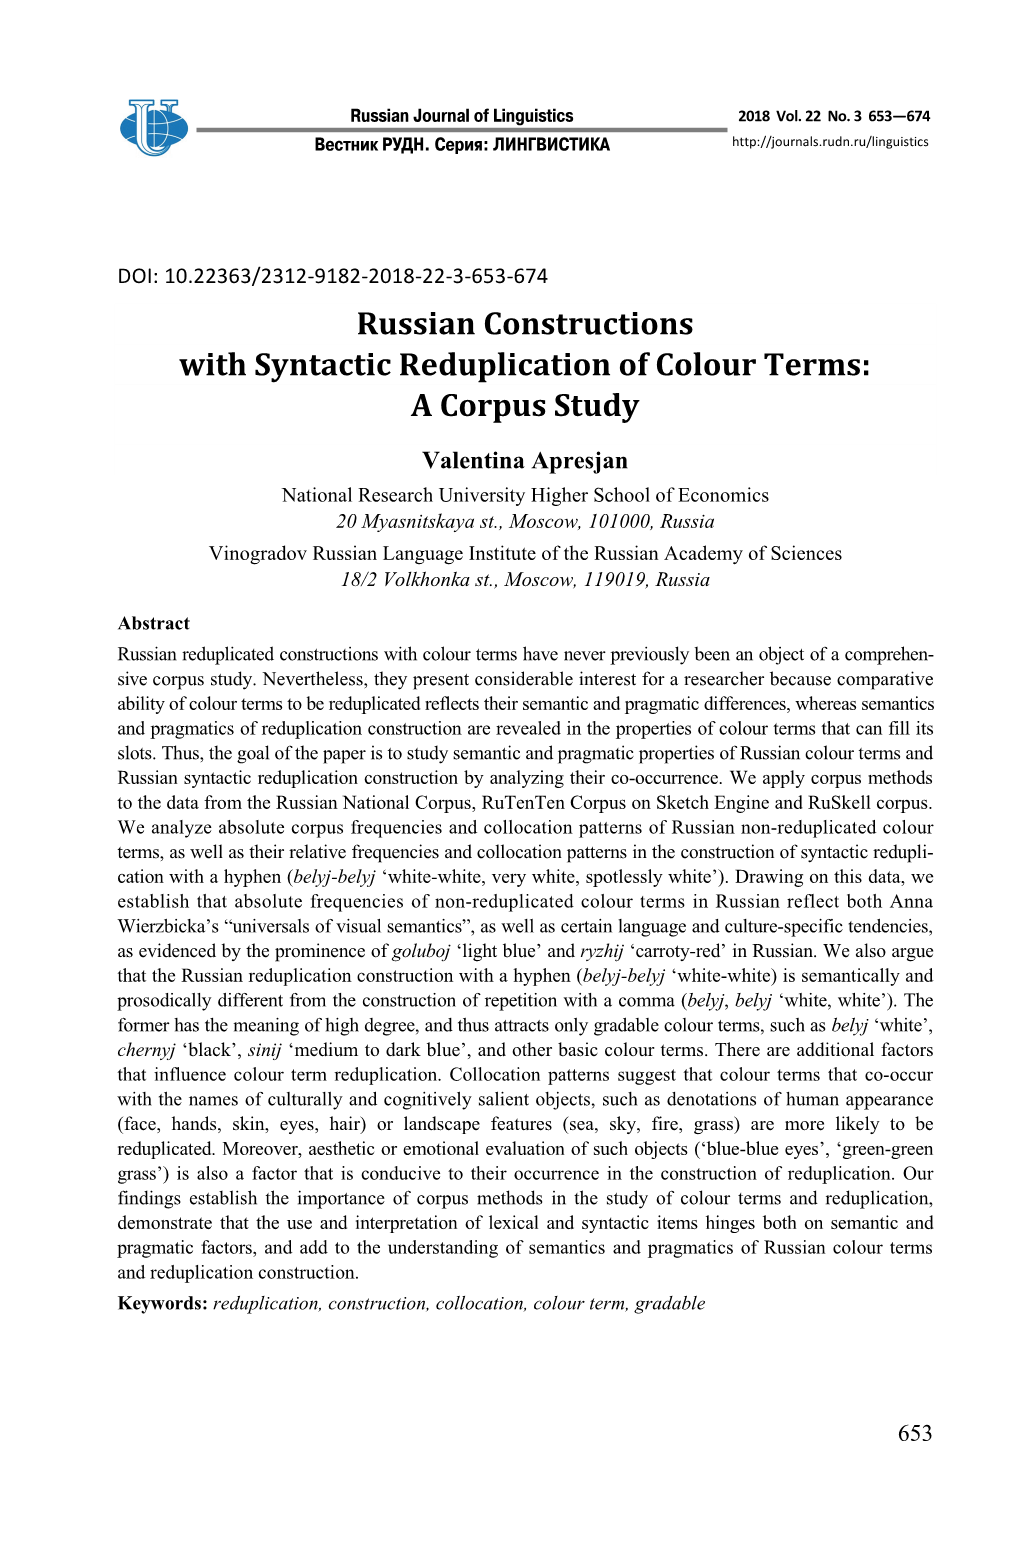 Russian Constructions with Syntactic Reduplication of Colour Terms: a Corpus Study